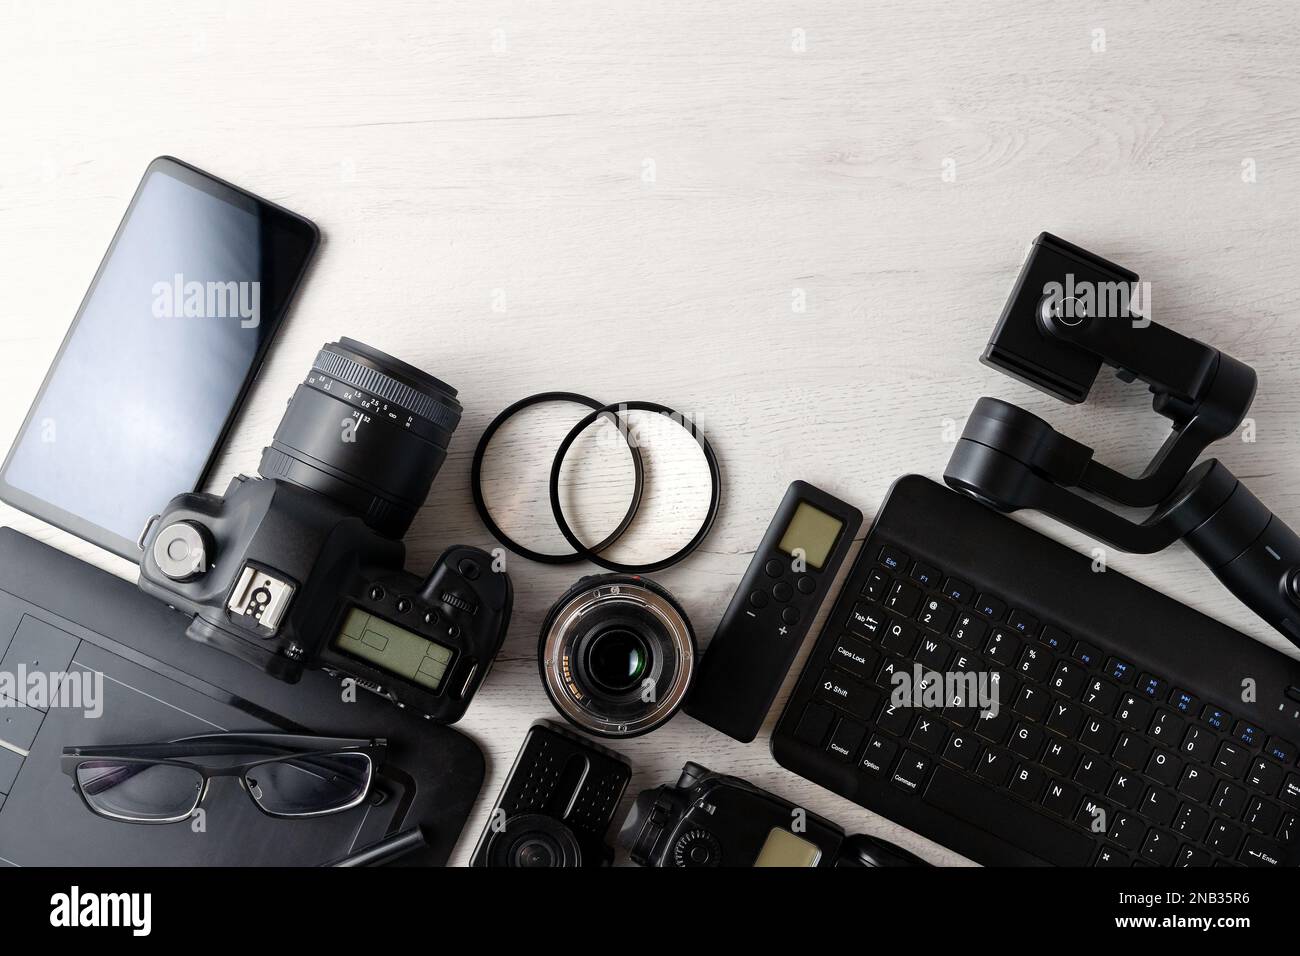 Digital photo workstation over white background.Top view of  digital camera, flash,lens and laptop.Digital photo edit and retouching. Stock Photo